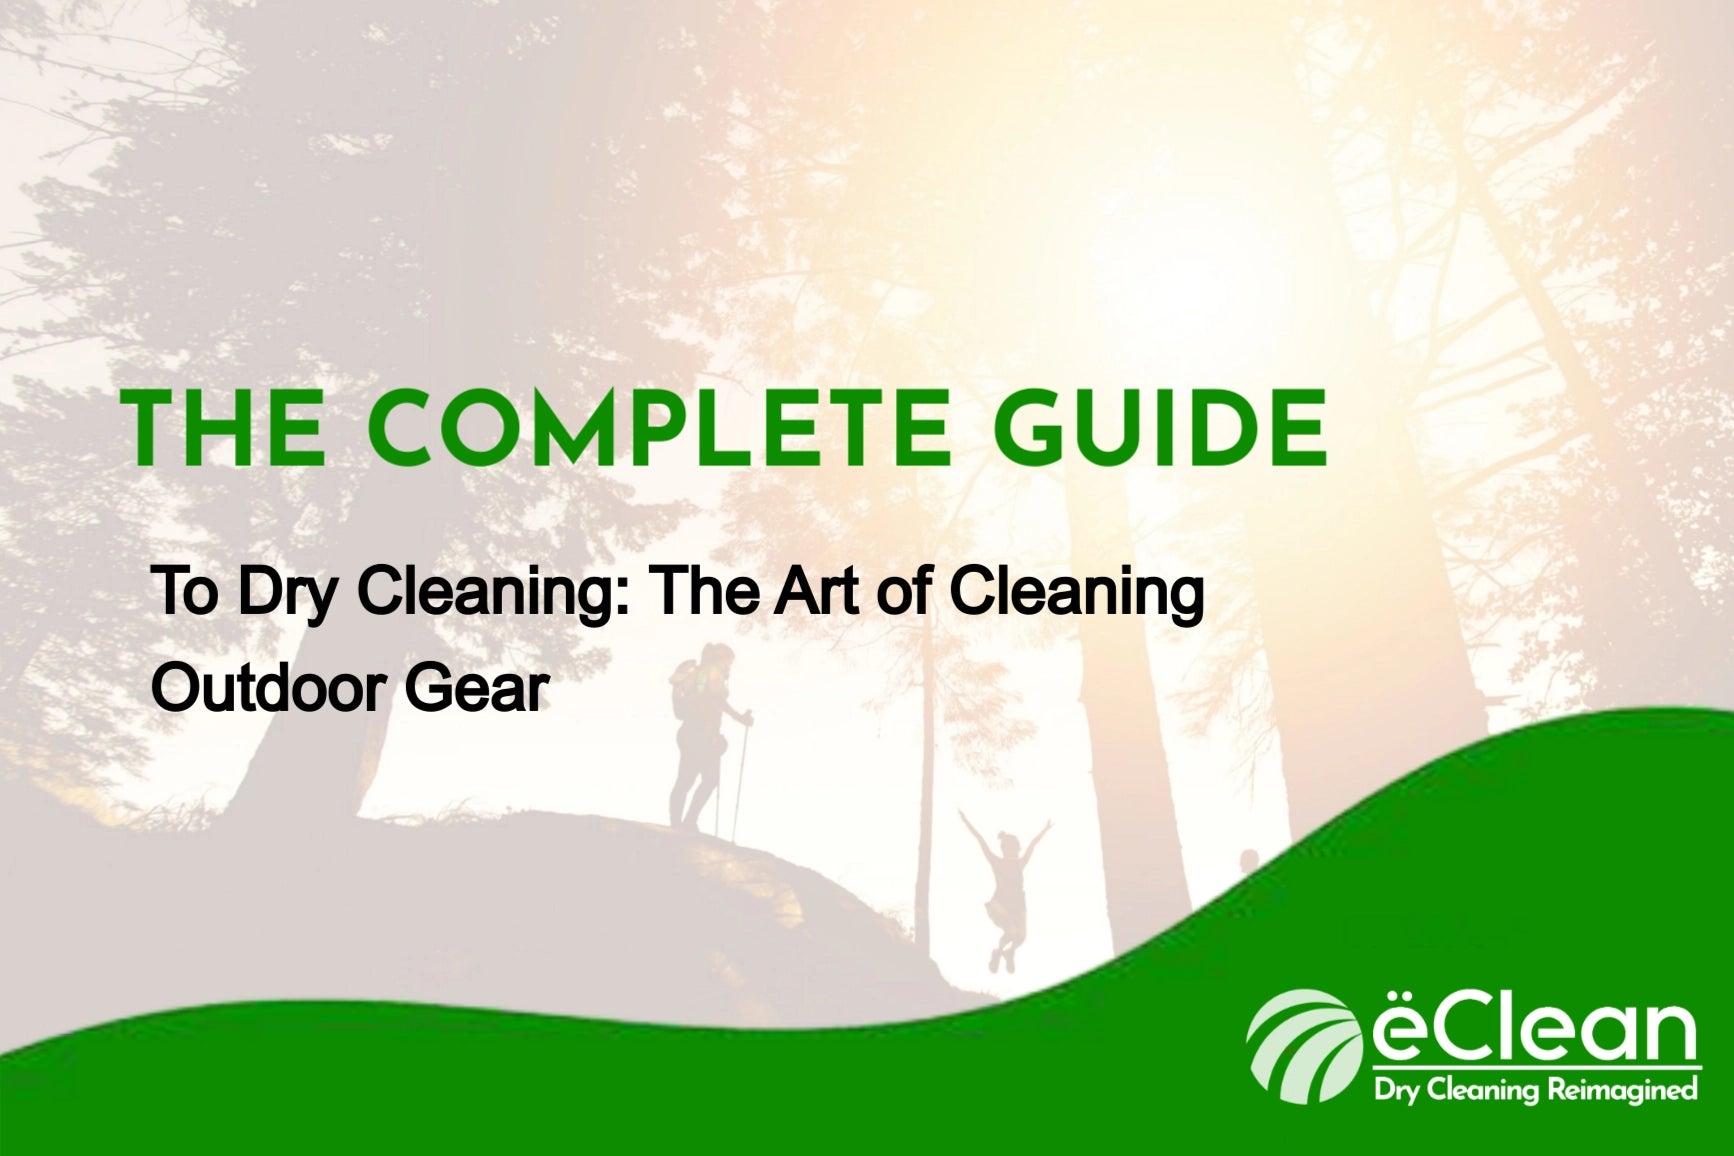 The Complete Guide to Dry Cleaning: The Art of Cleaning Outdoor Gear